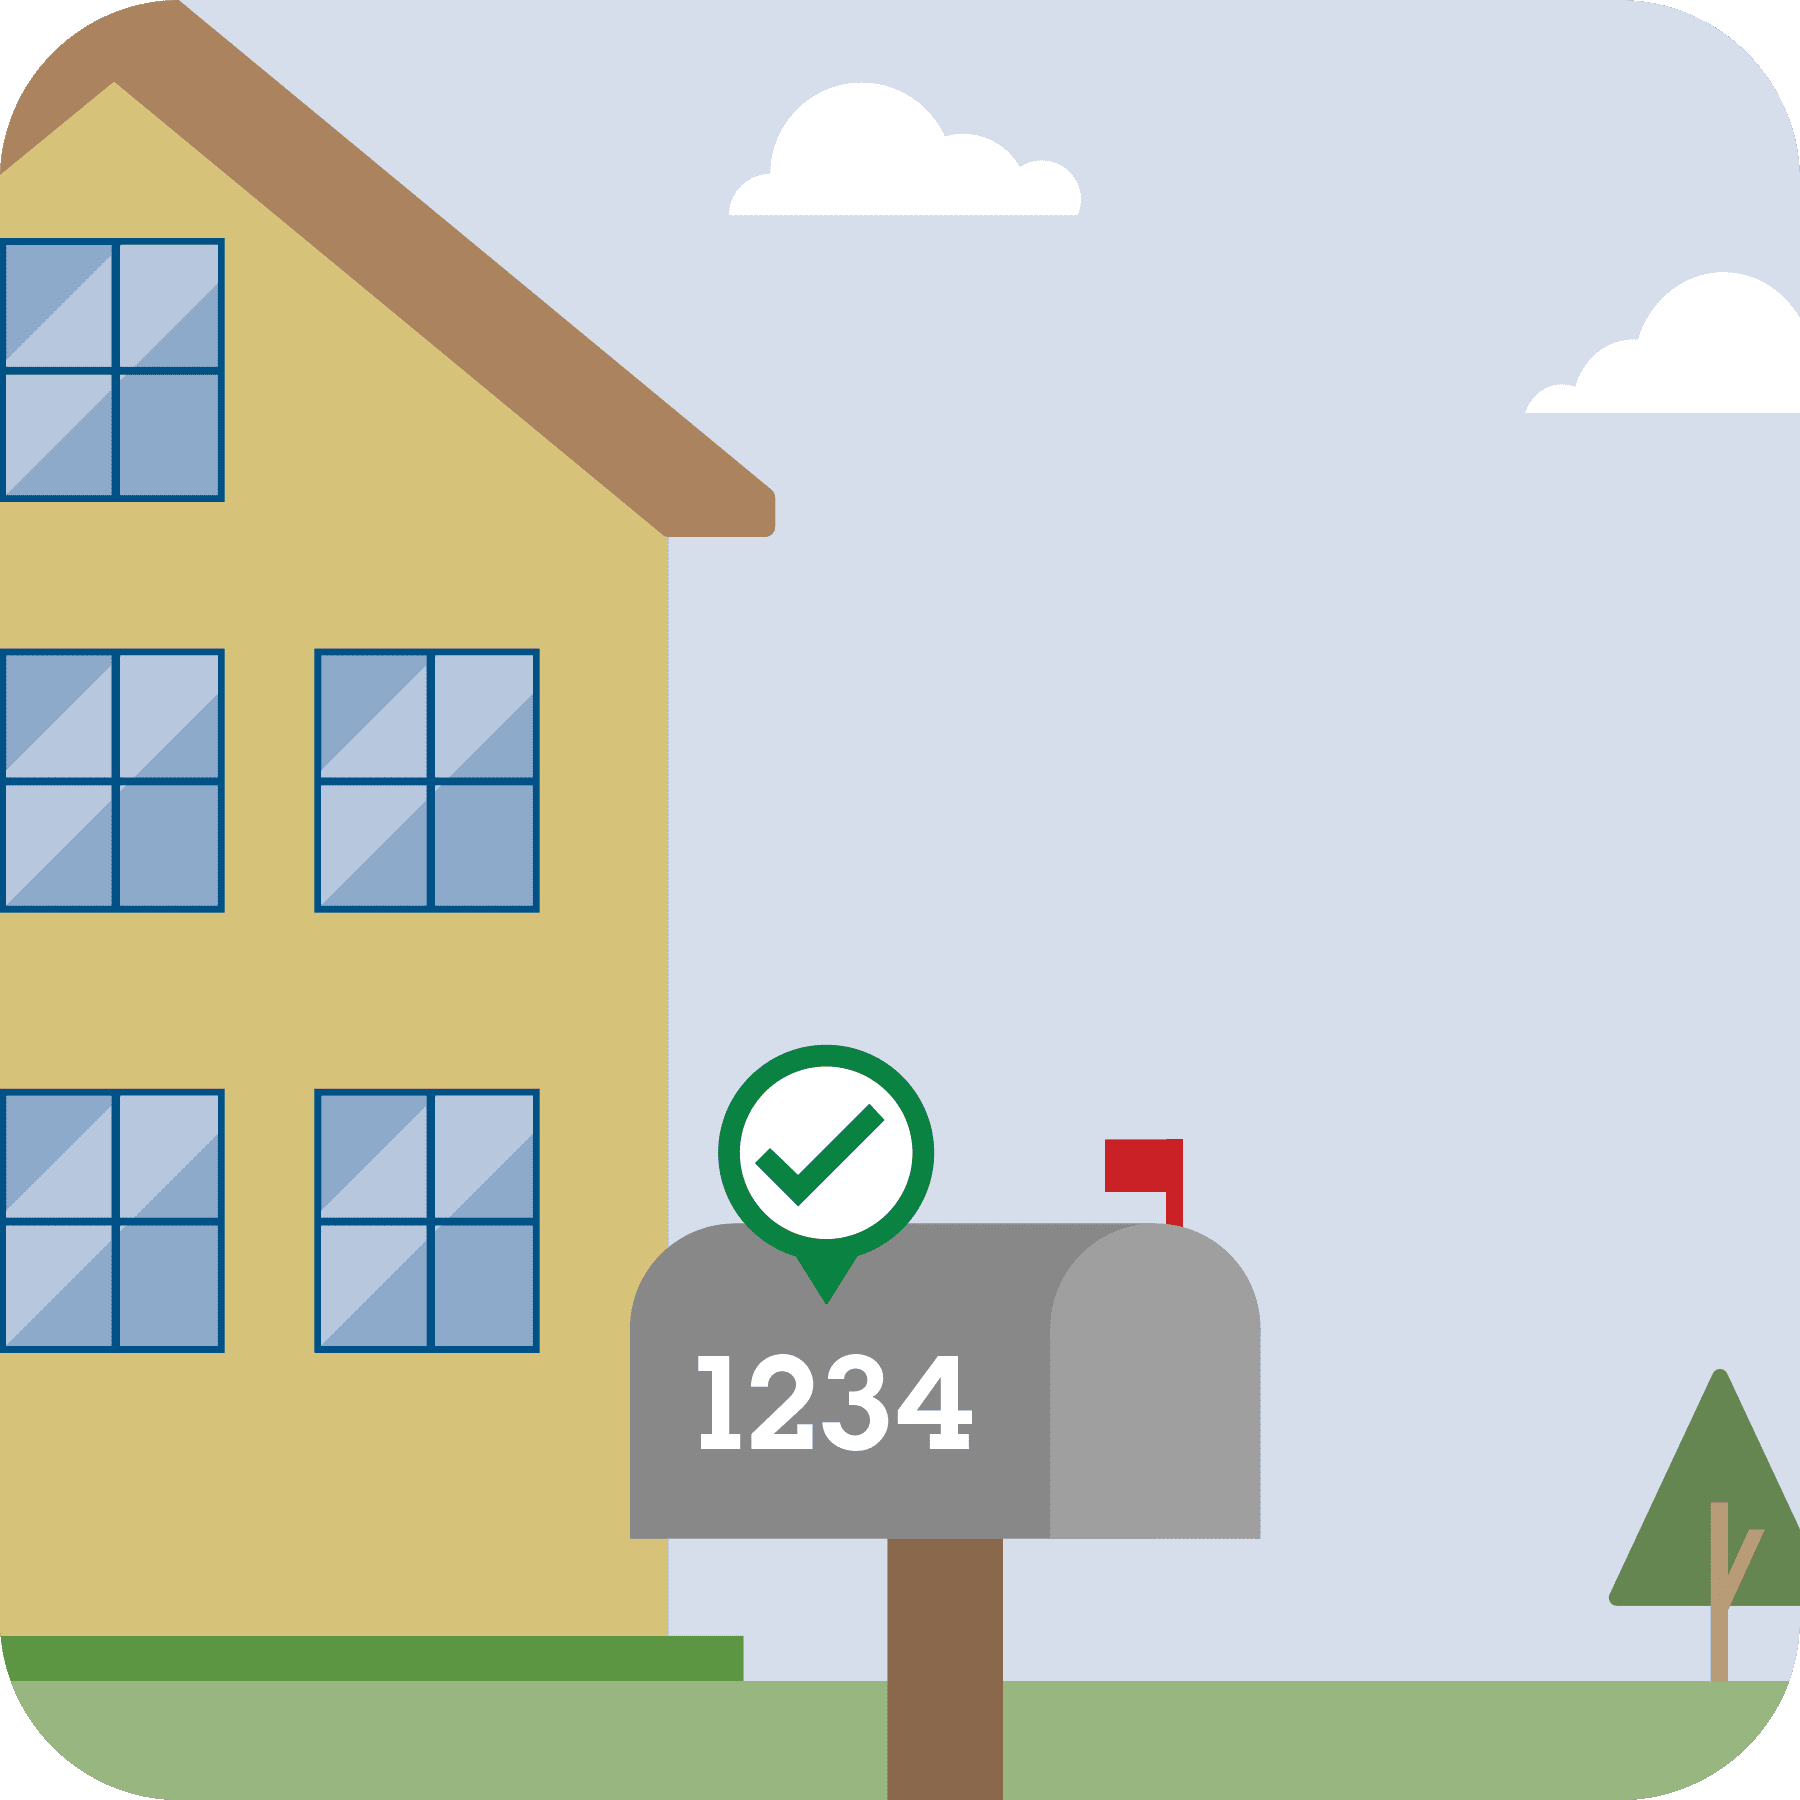 Depiction of a home number visible on a mailbox in front of home.